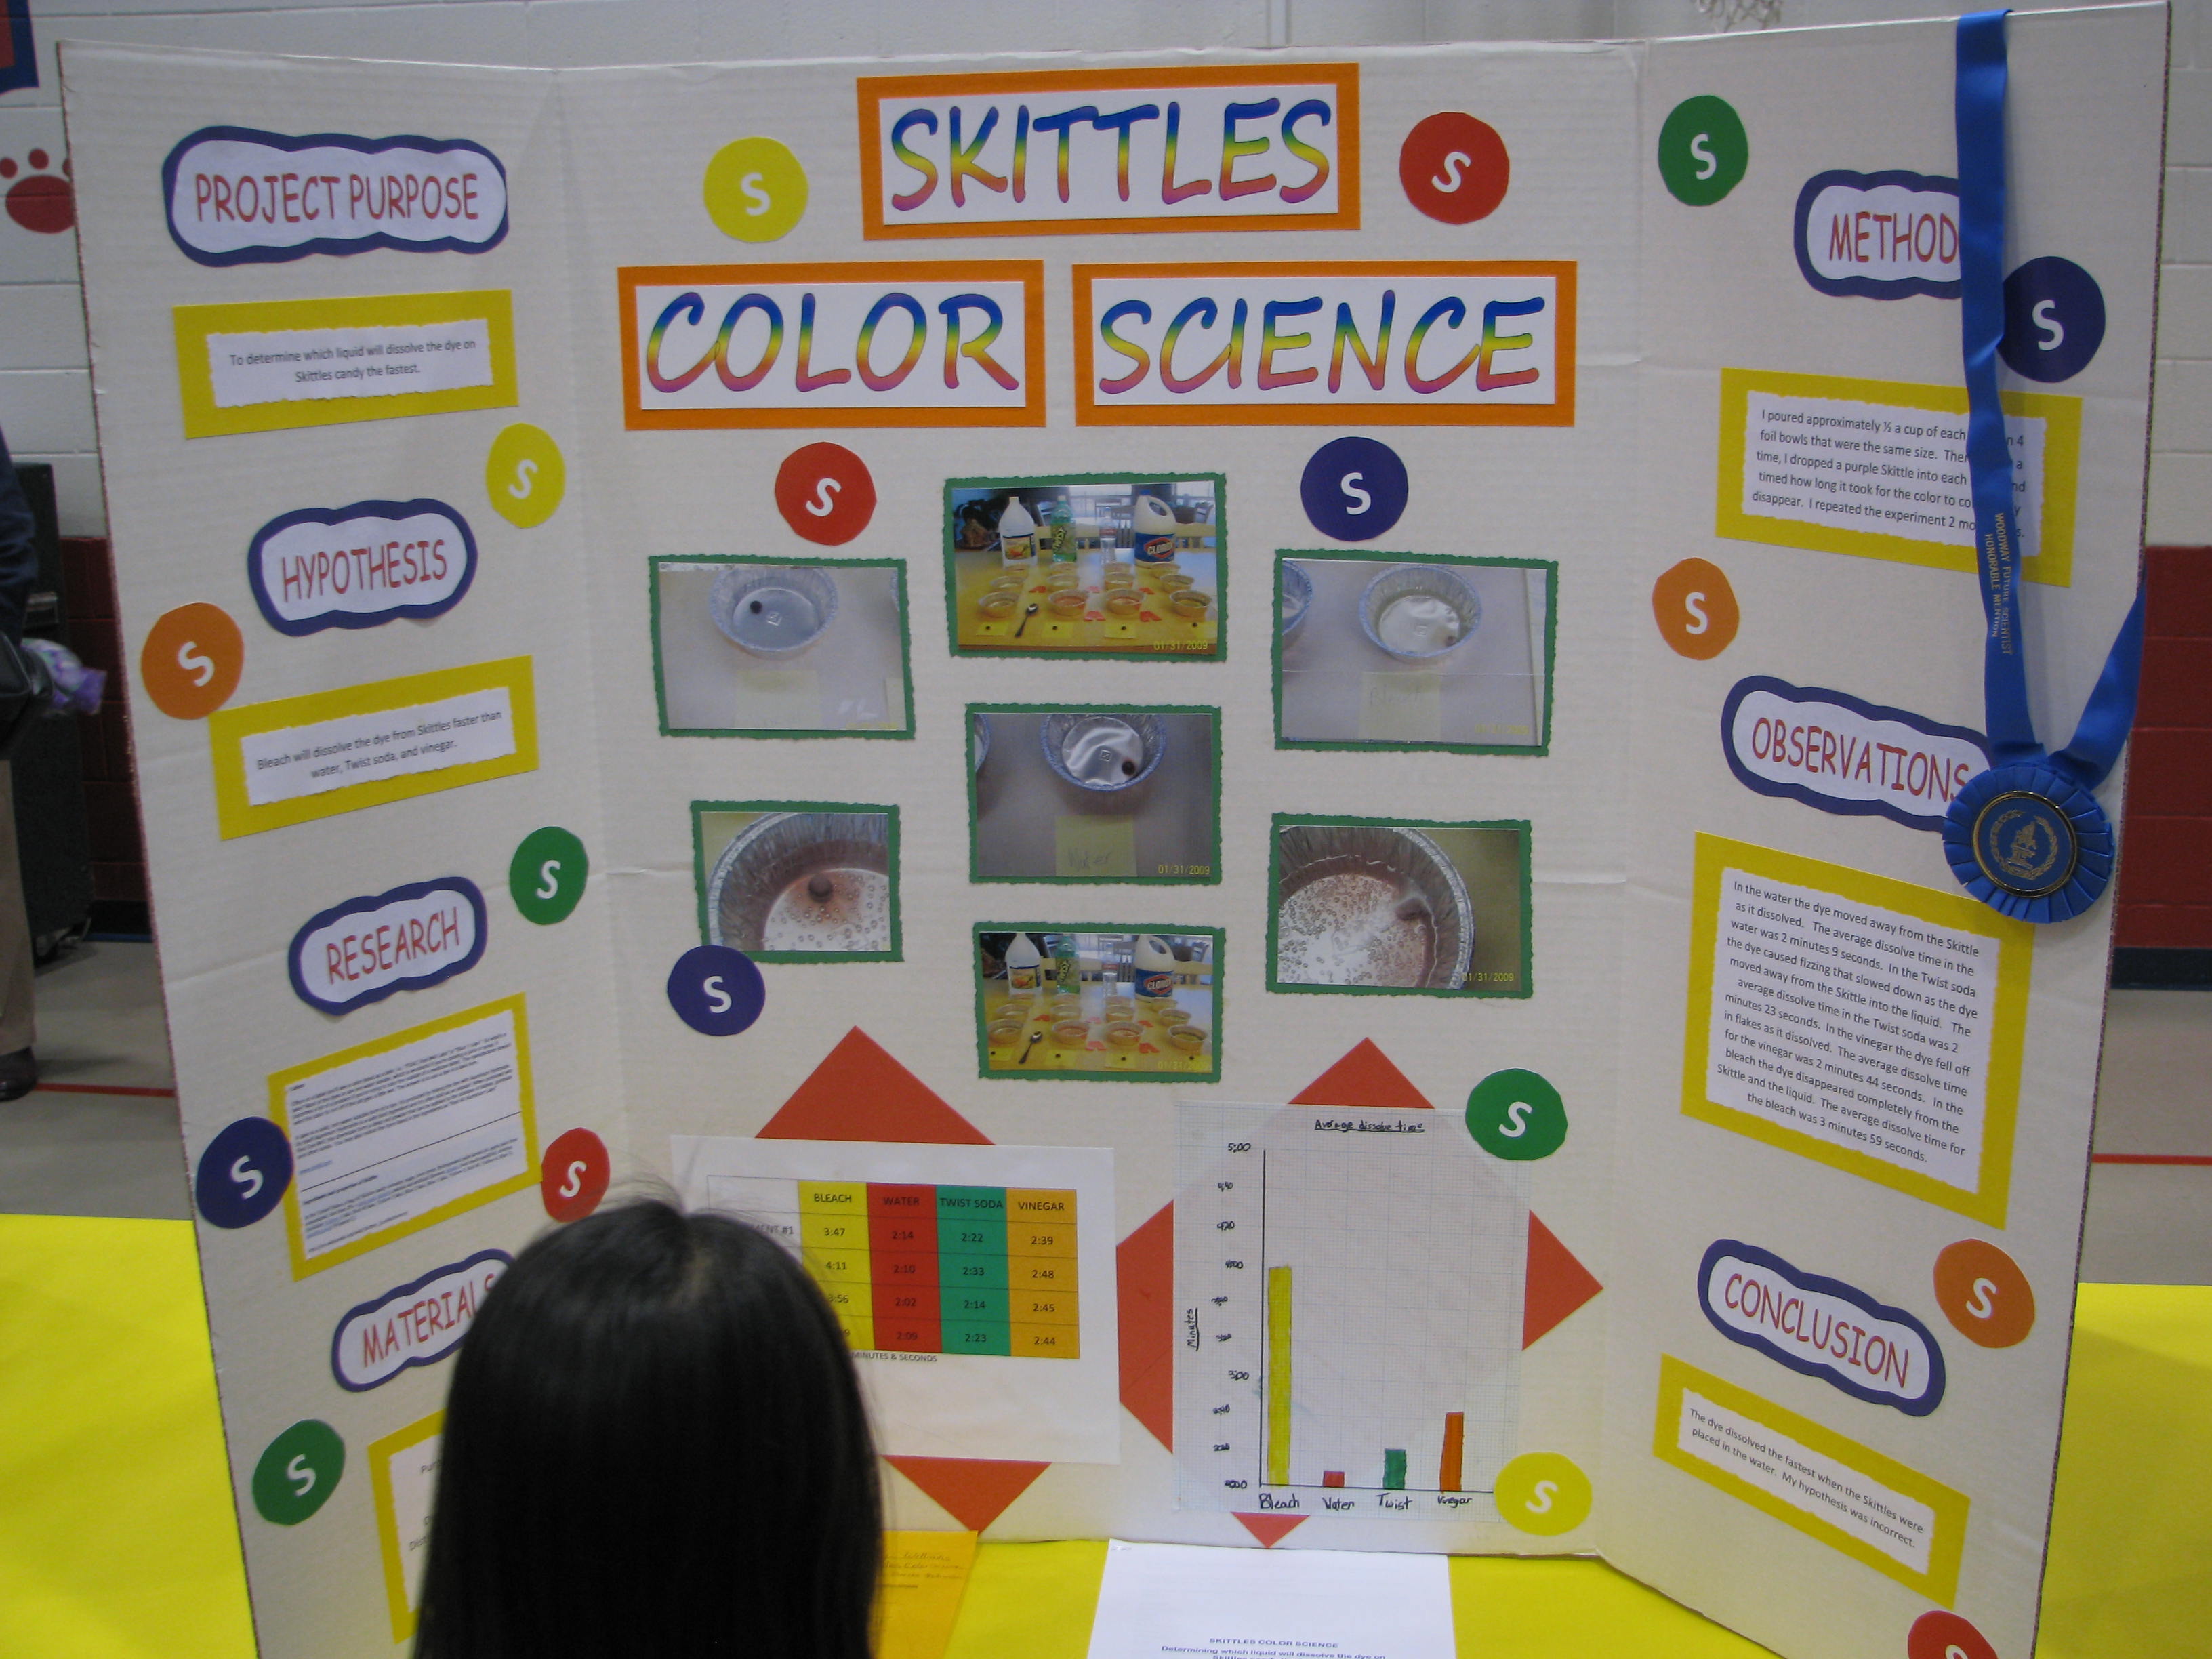 Science Fair Projects